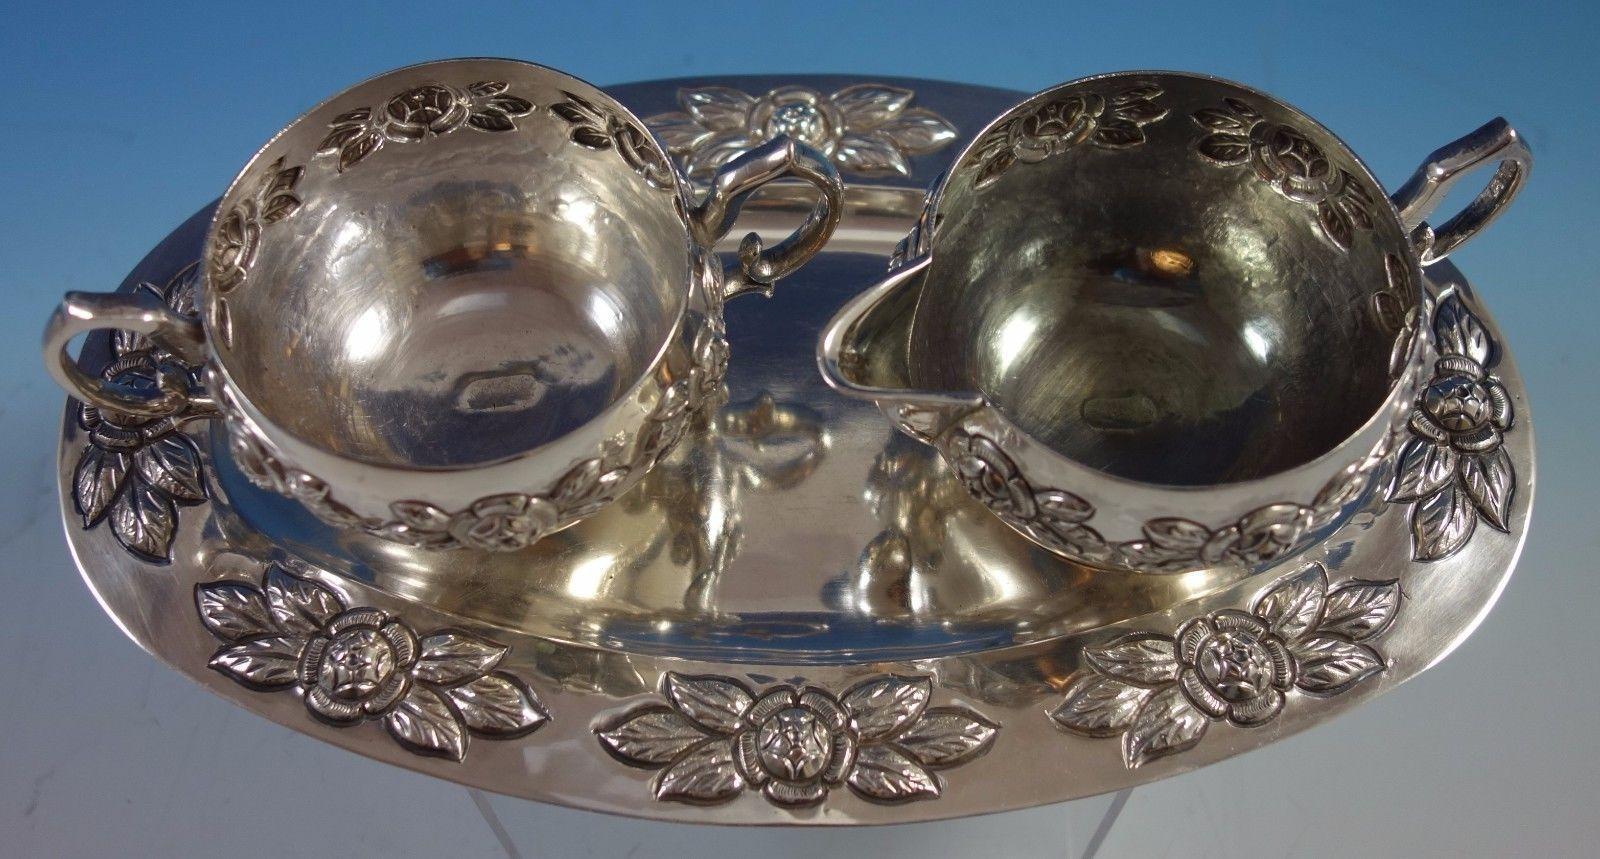 Aztec rose by Sanborns sterling silver 3-piece sugar and creamer set with tray in the pattern Aztec Rose by Sanborns. This set weighs 18.2 troy ounces total. This set includes: 1 - Tray: Measures 1/4 tall, 10 3/4 long, and 6 wide. 1 - Sugar: